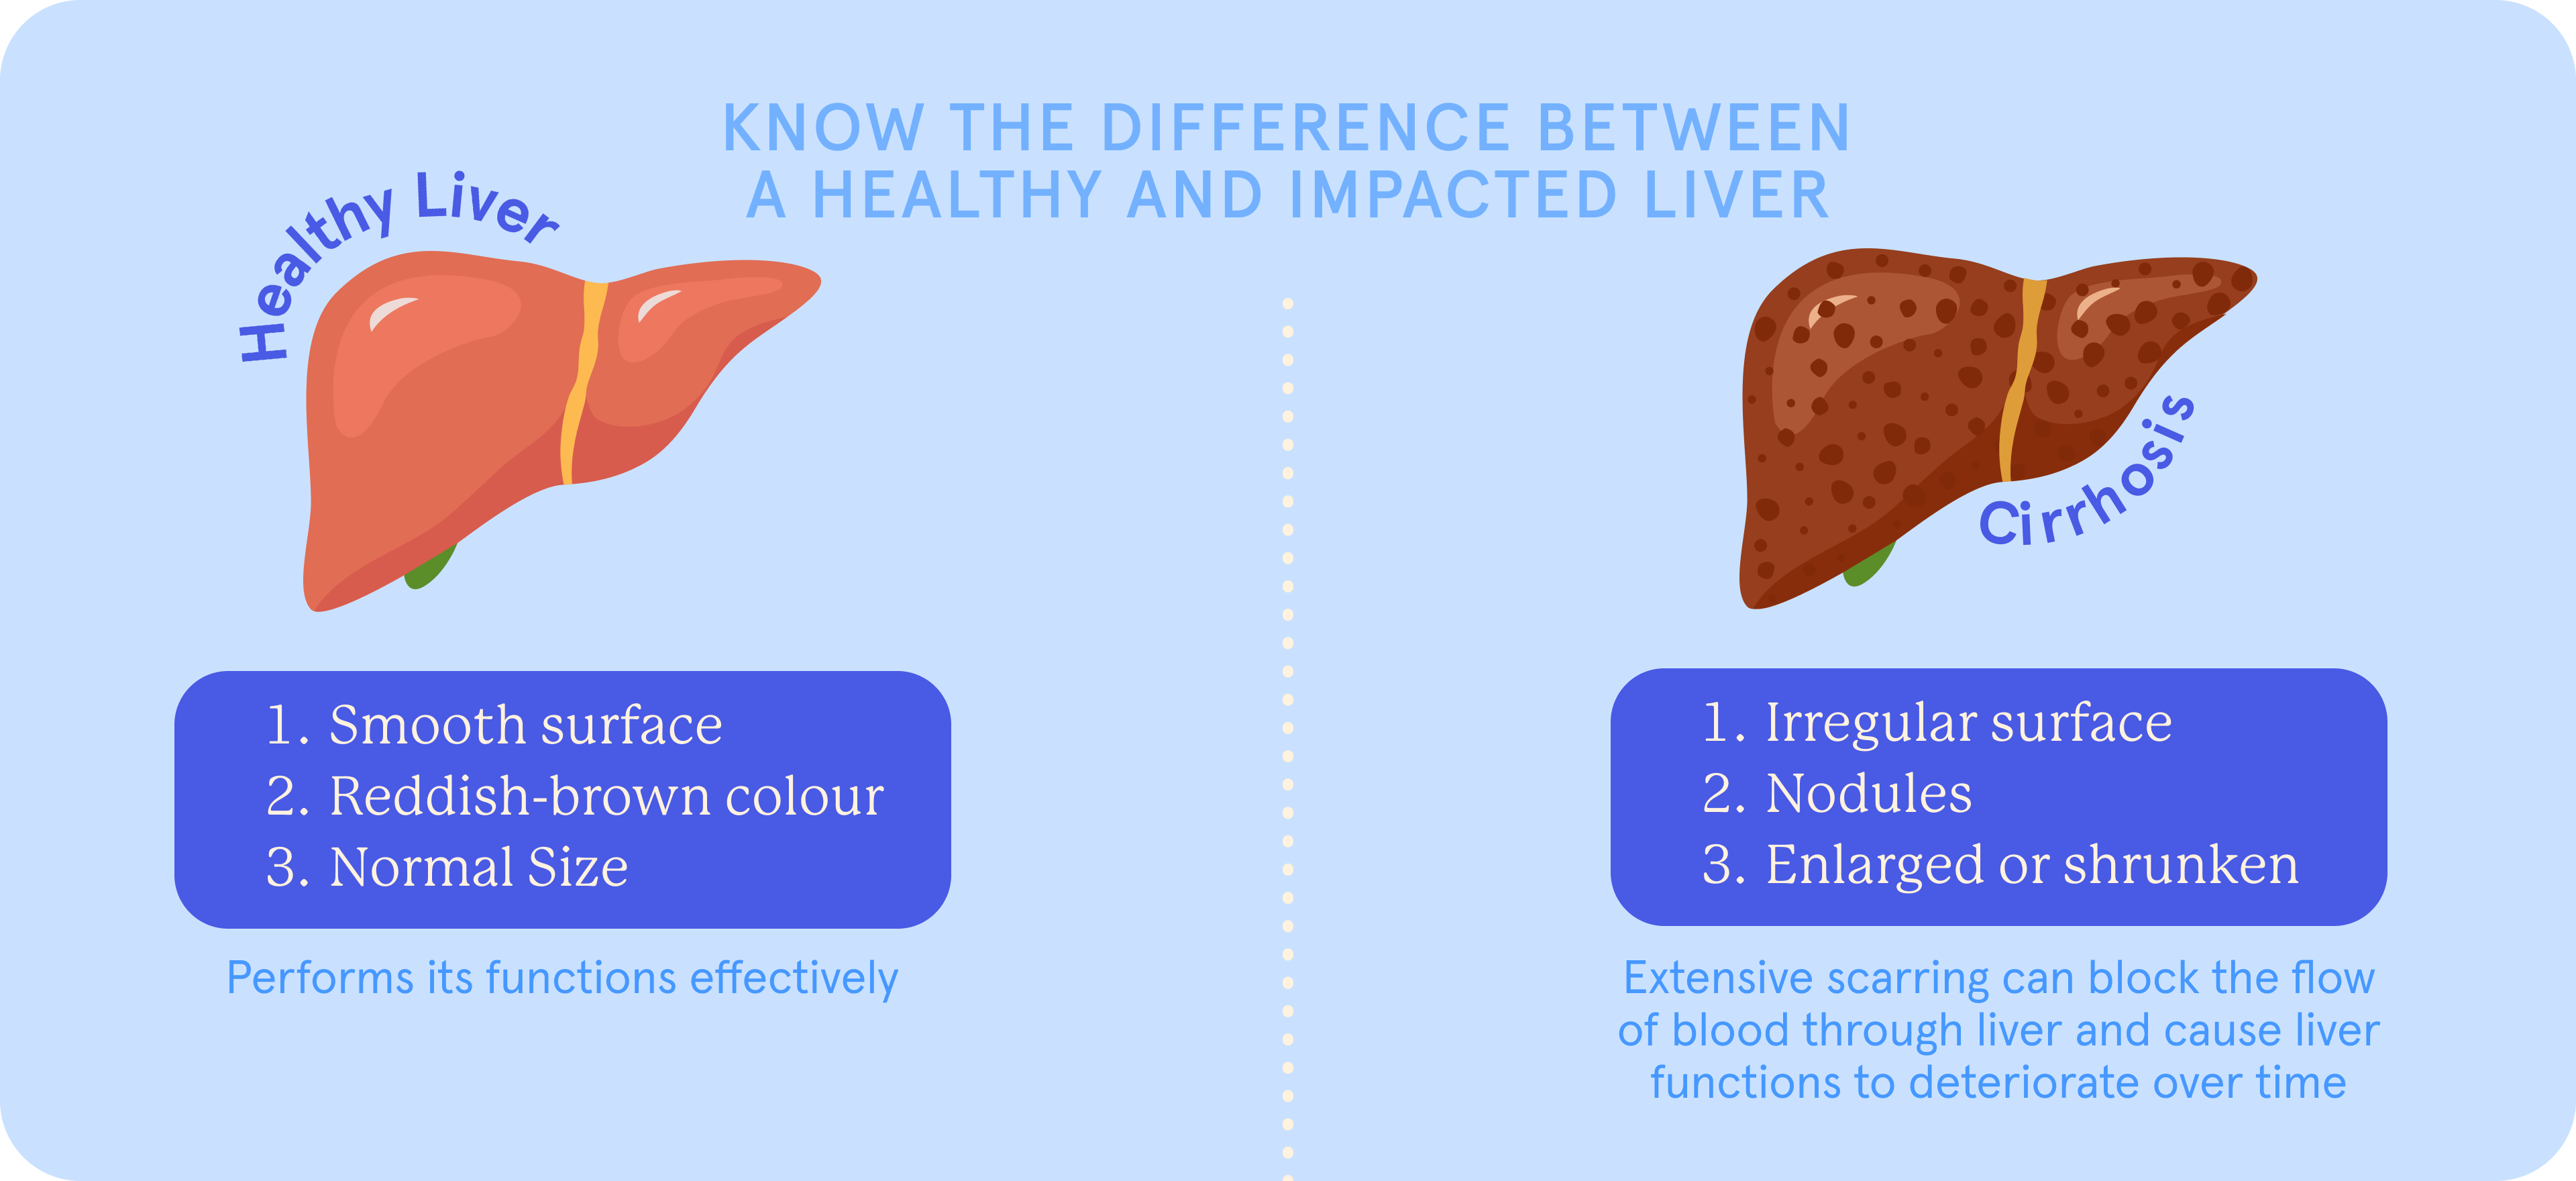 A pictorial difference of a healthy and impacted liver 